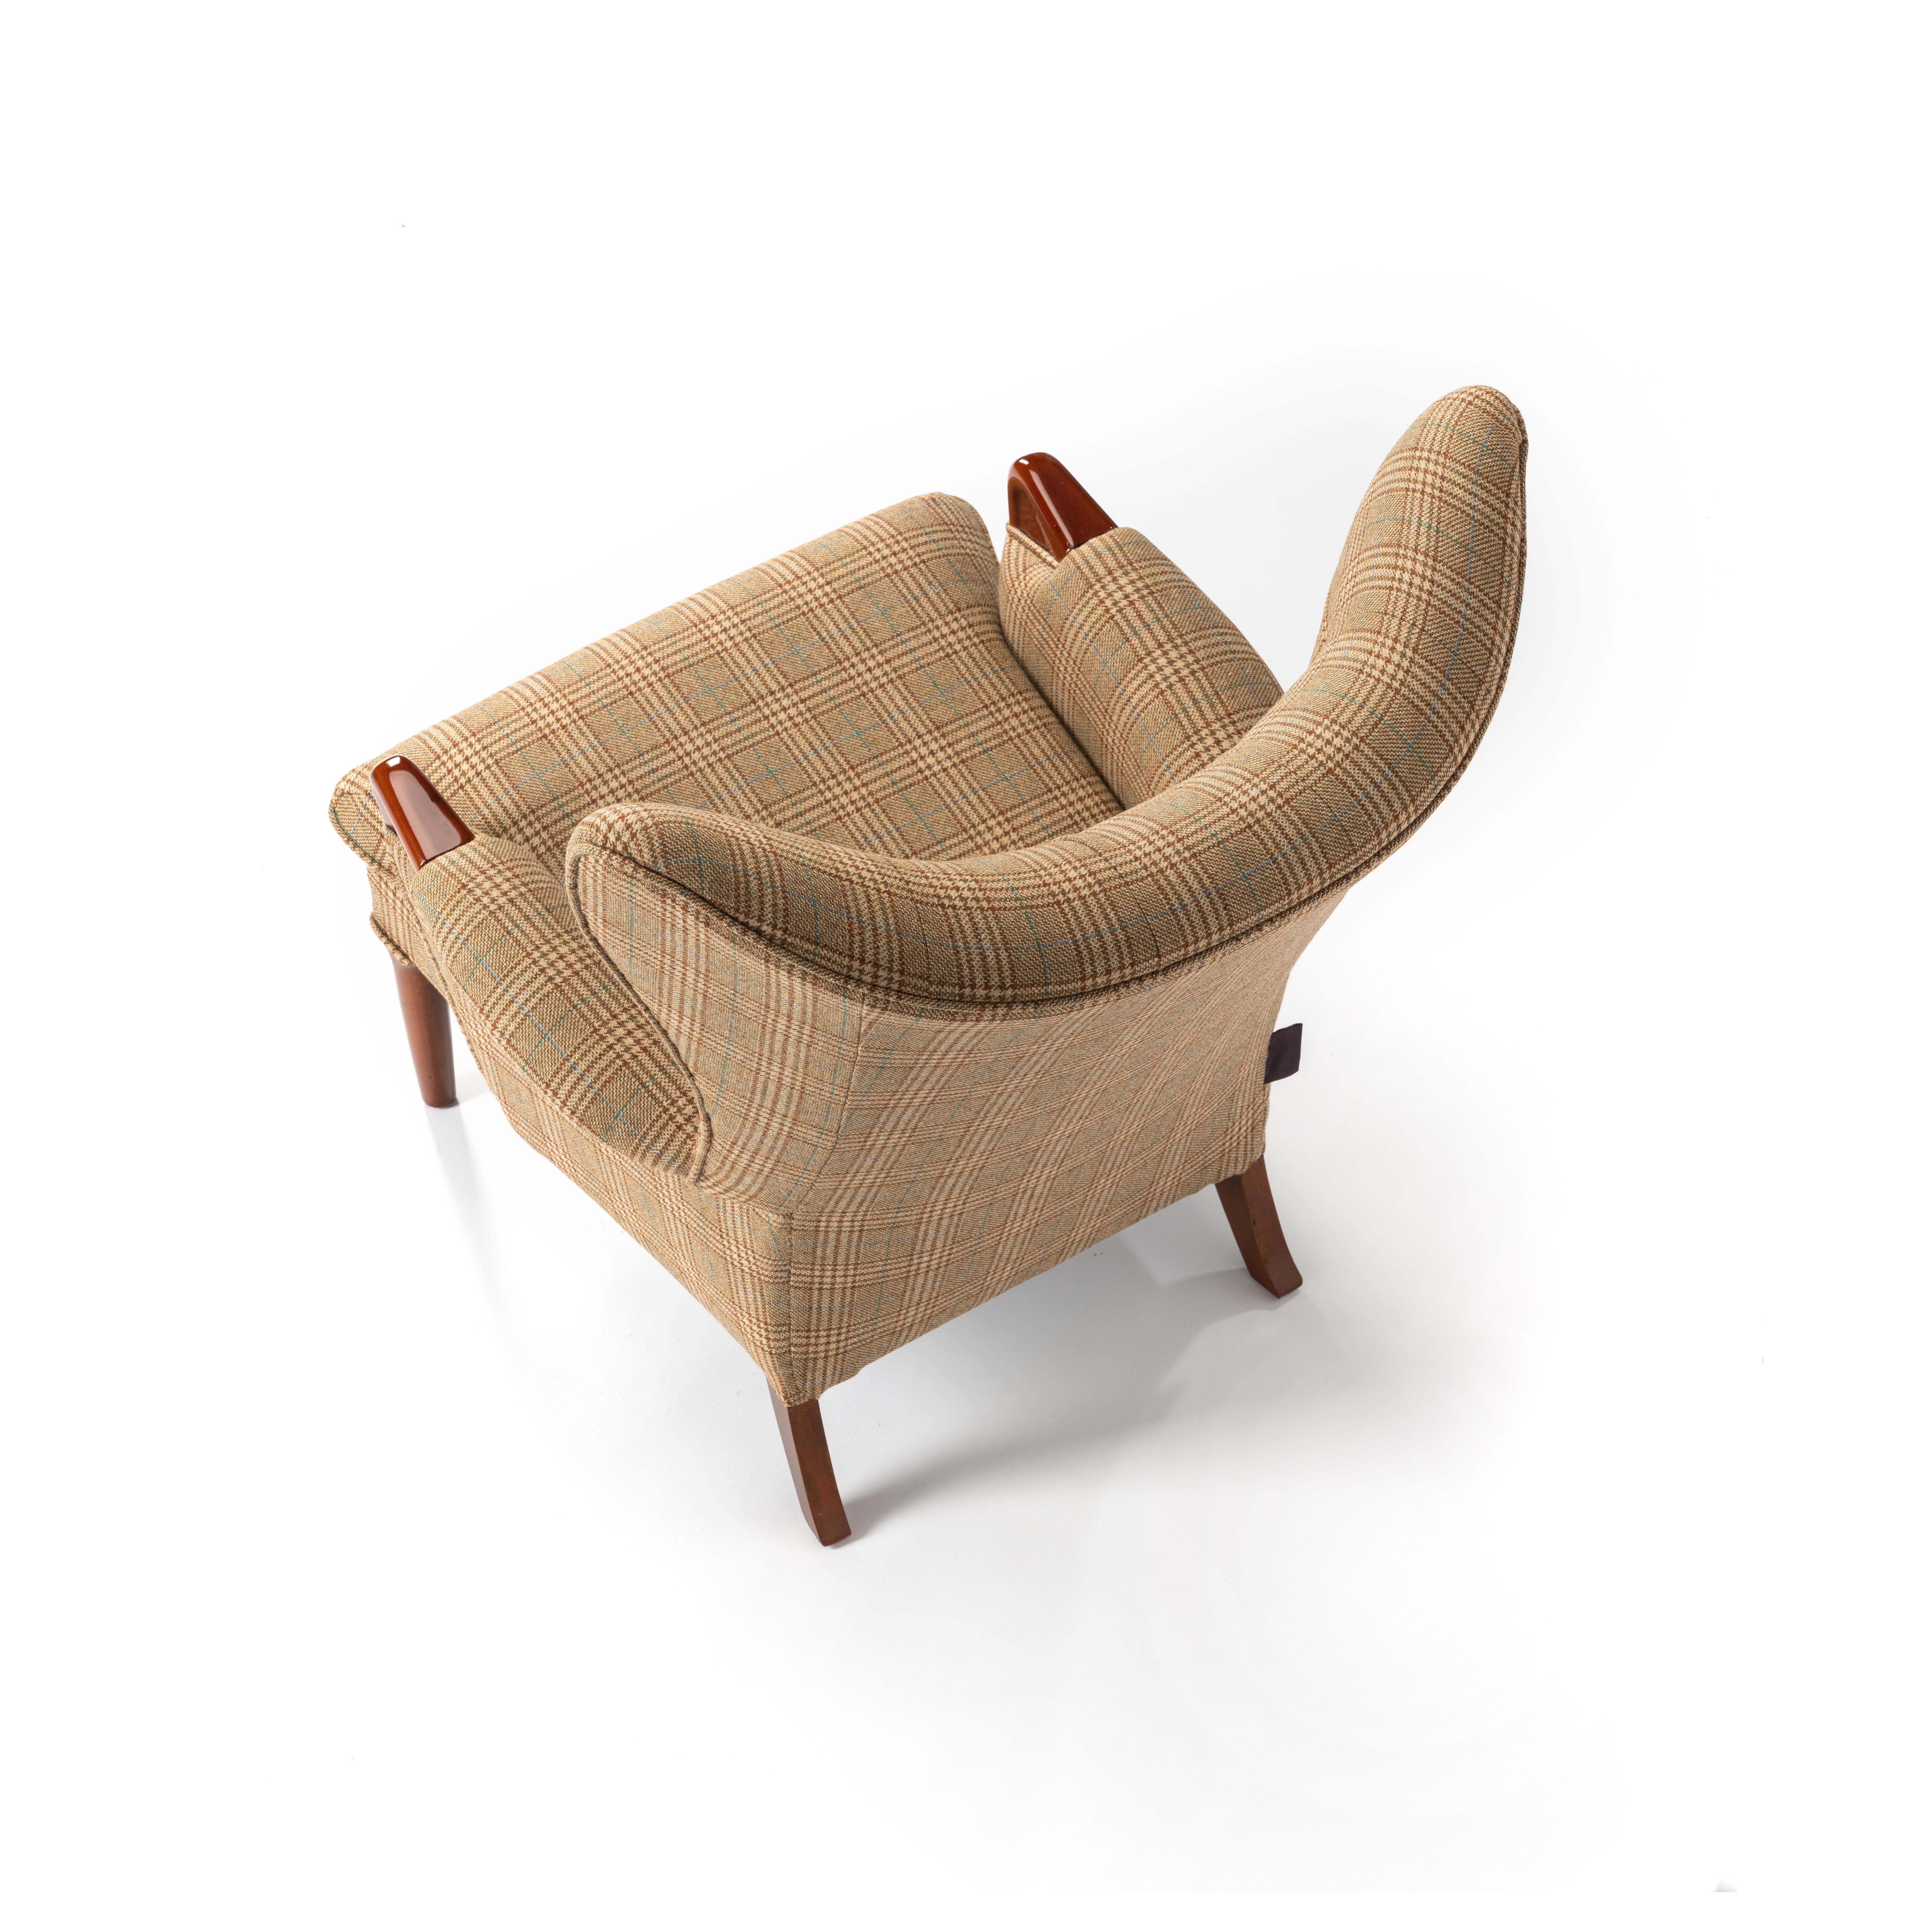 Mid-20th Century Midcentury Vintage Wingback Chairs Reupholstered in Yorkshire Tweed, circa 1960s